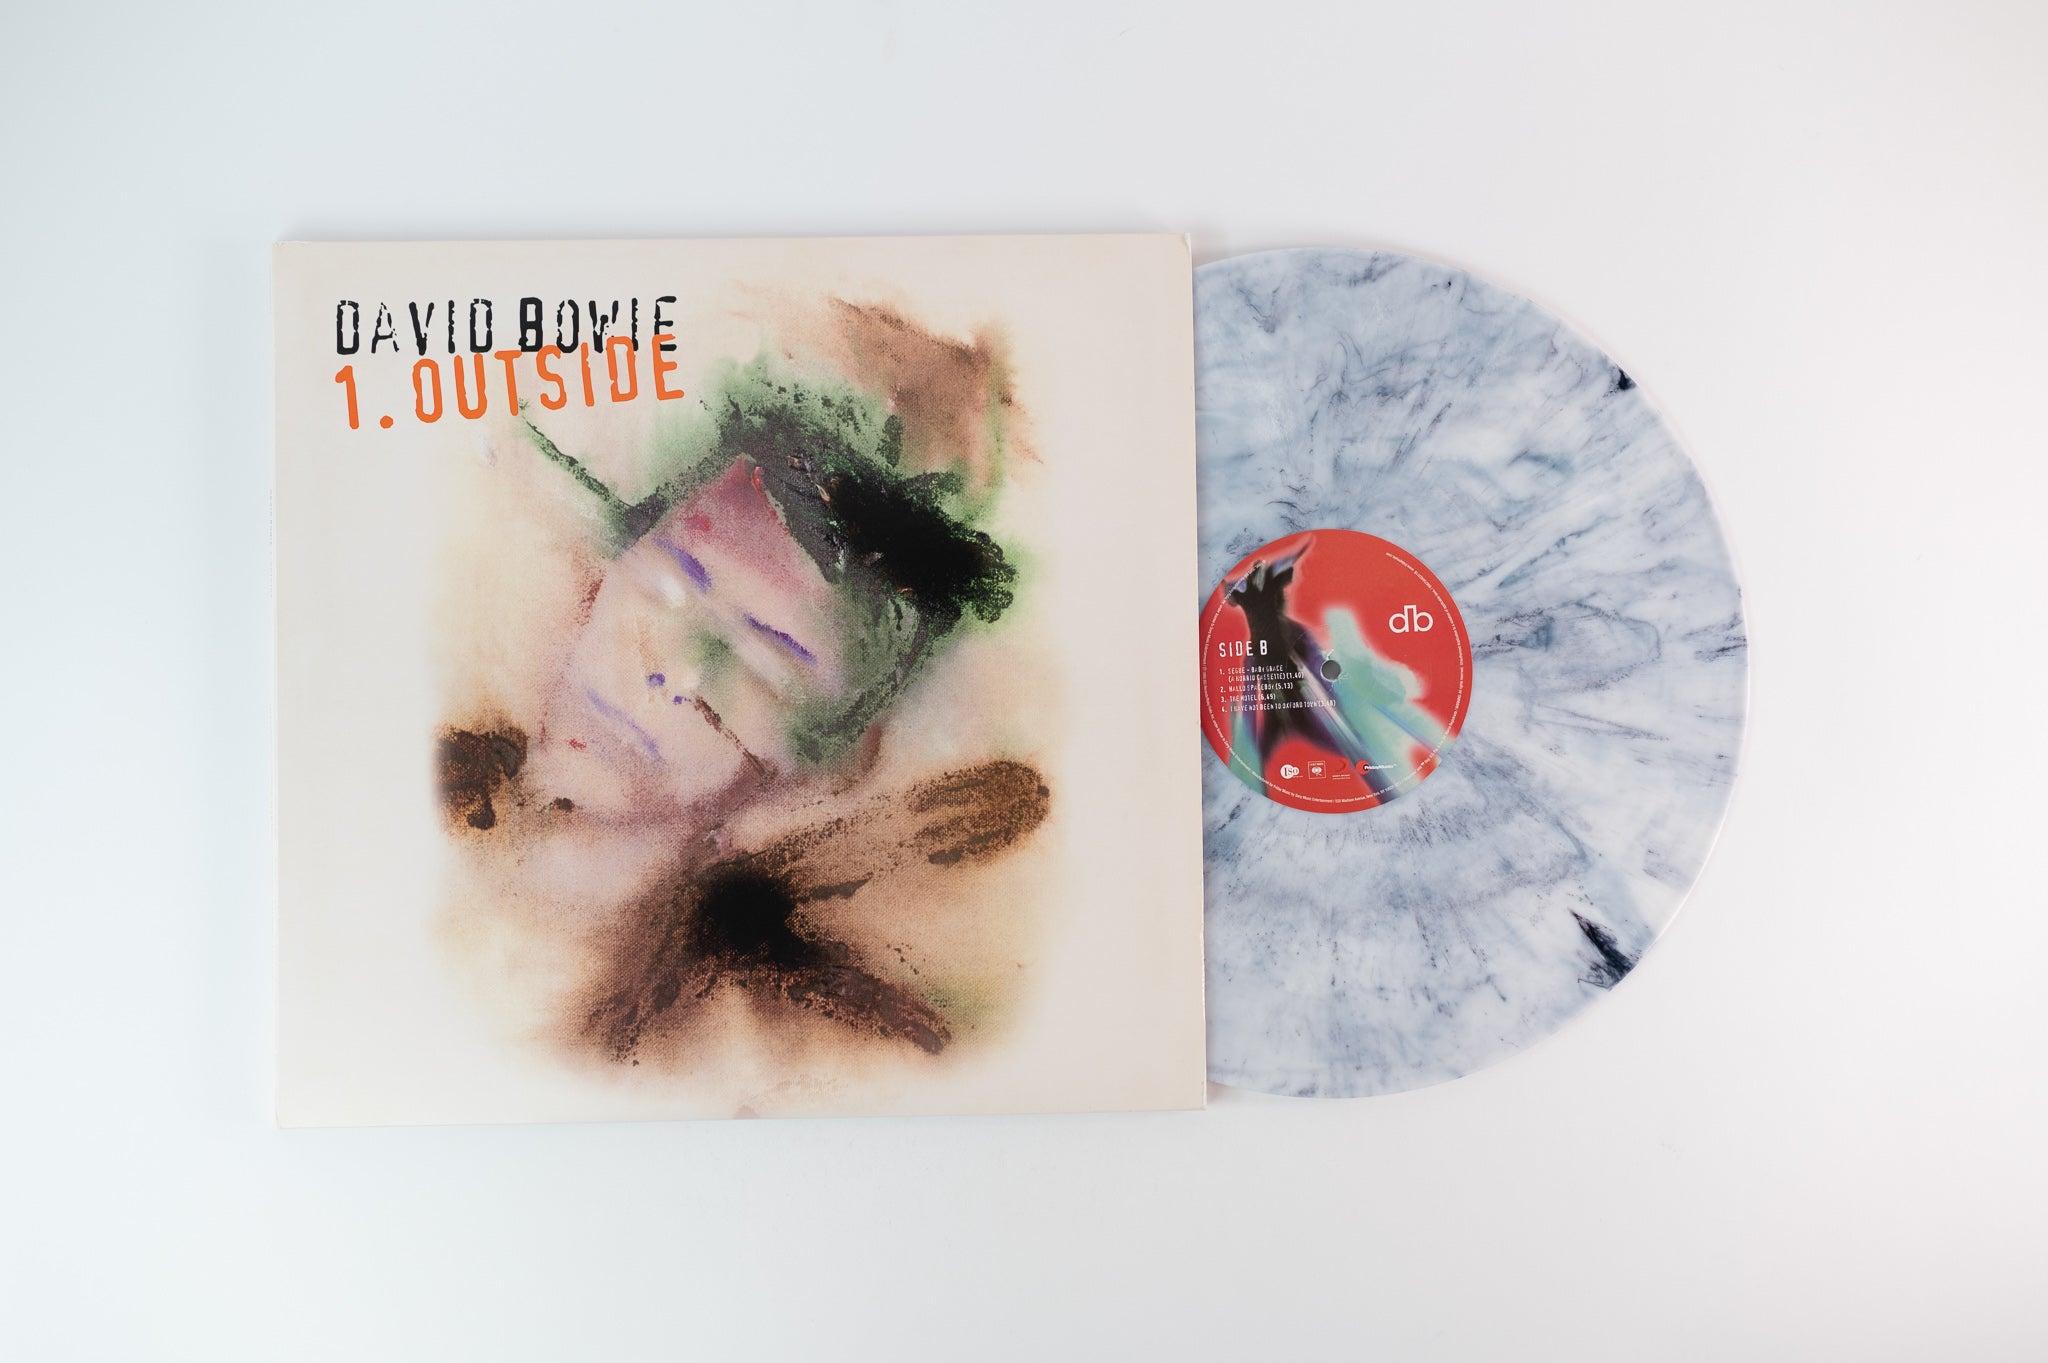 David Bowie - 1. Outside (The Nathan Adler Diaries: A Hyper Cycle) on Friday Music - Black & White Swirl Vinyl